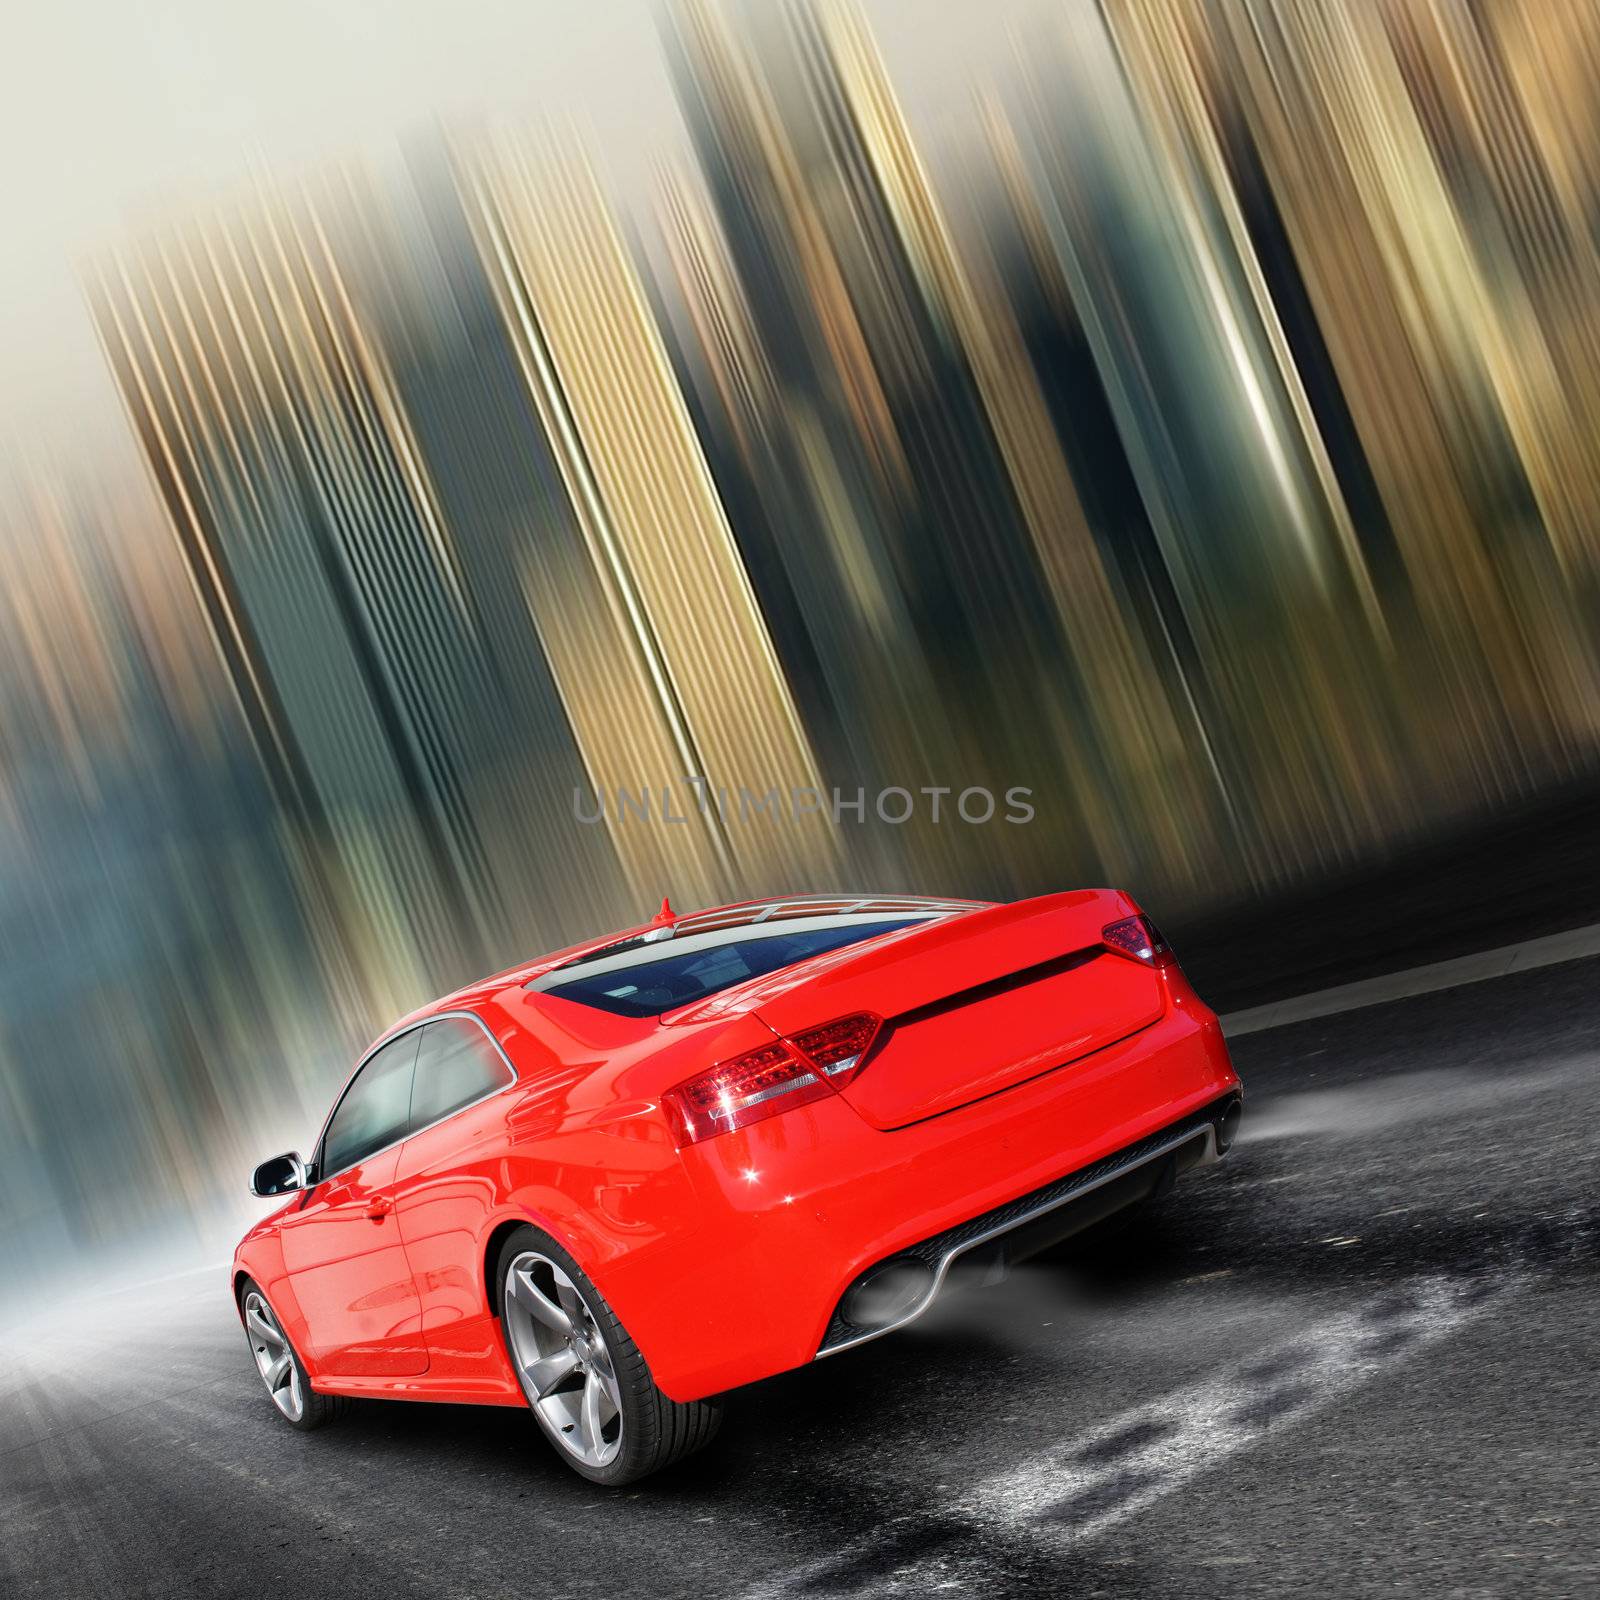 red sports car on a colorful background